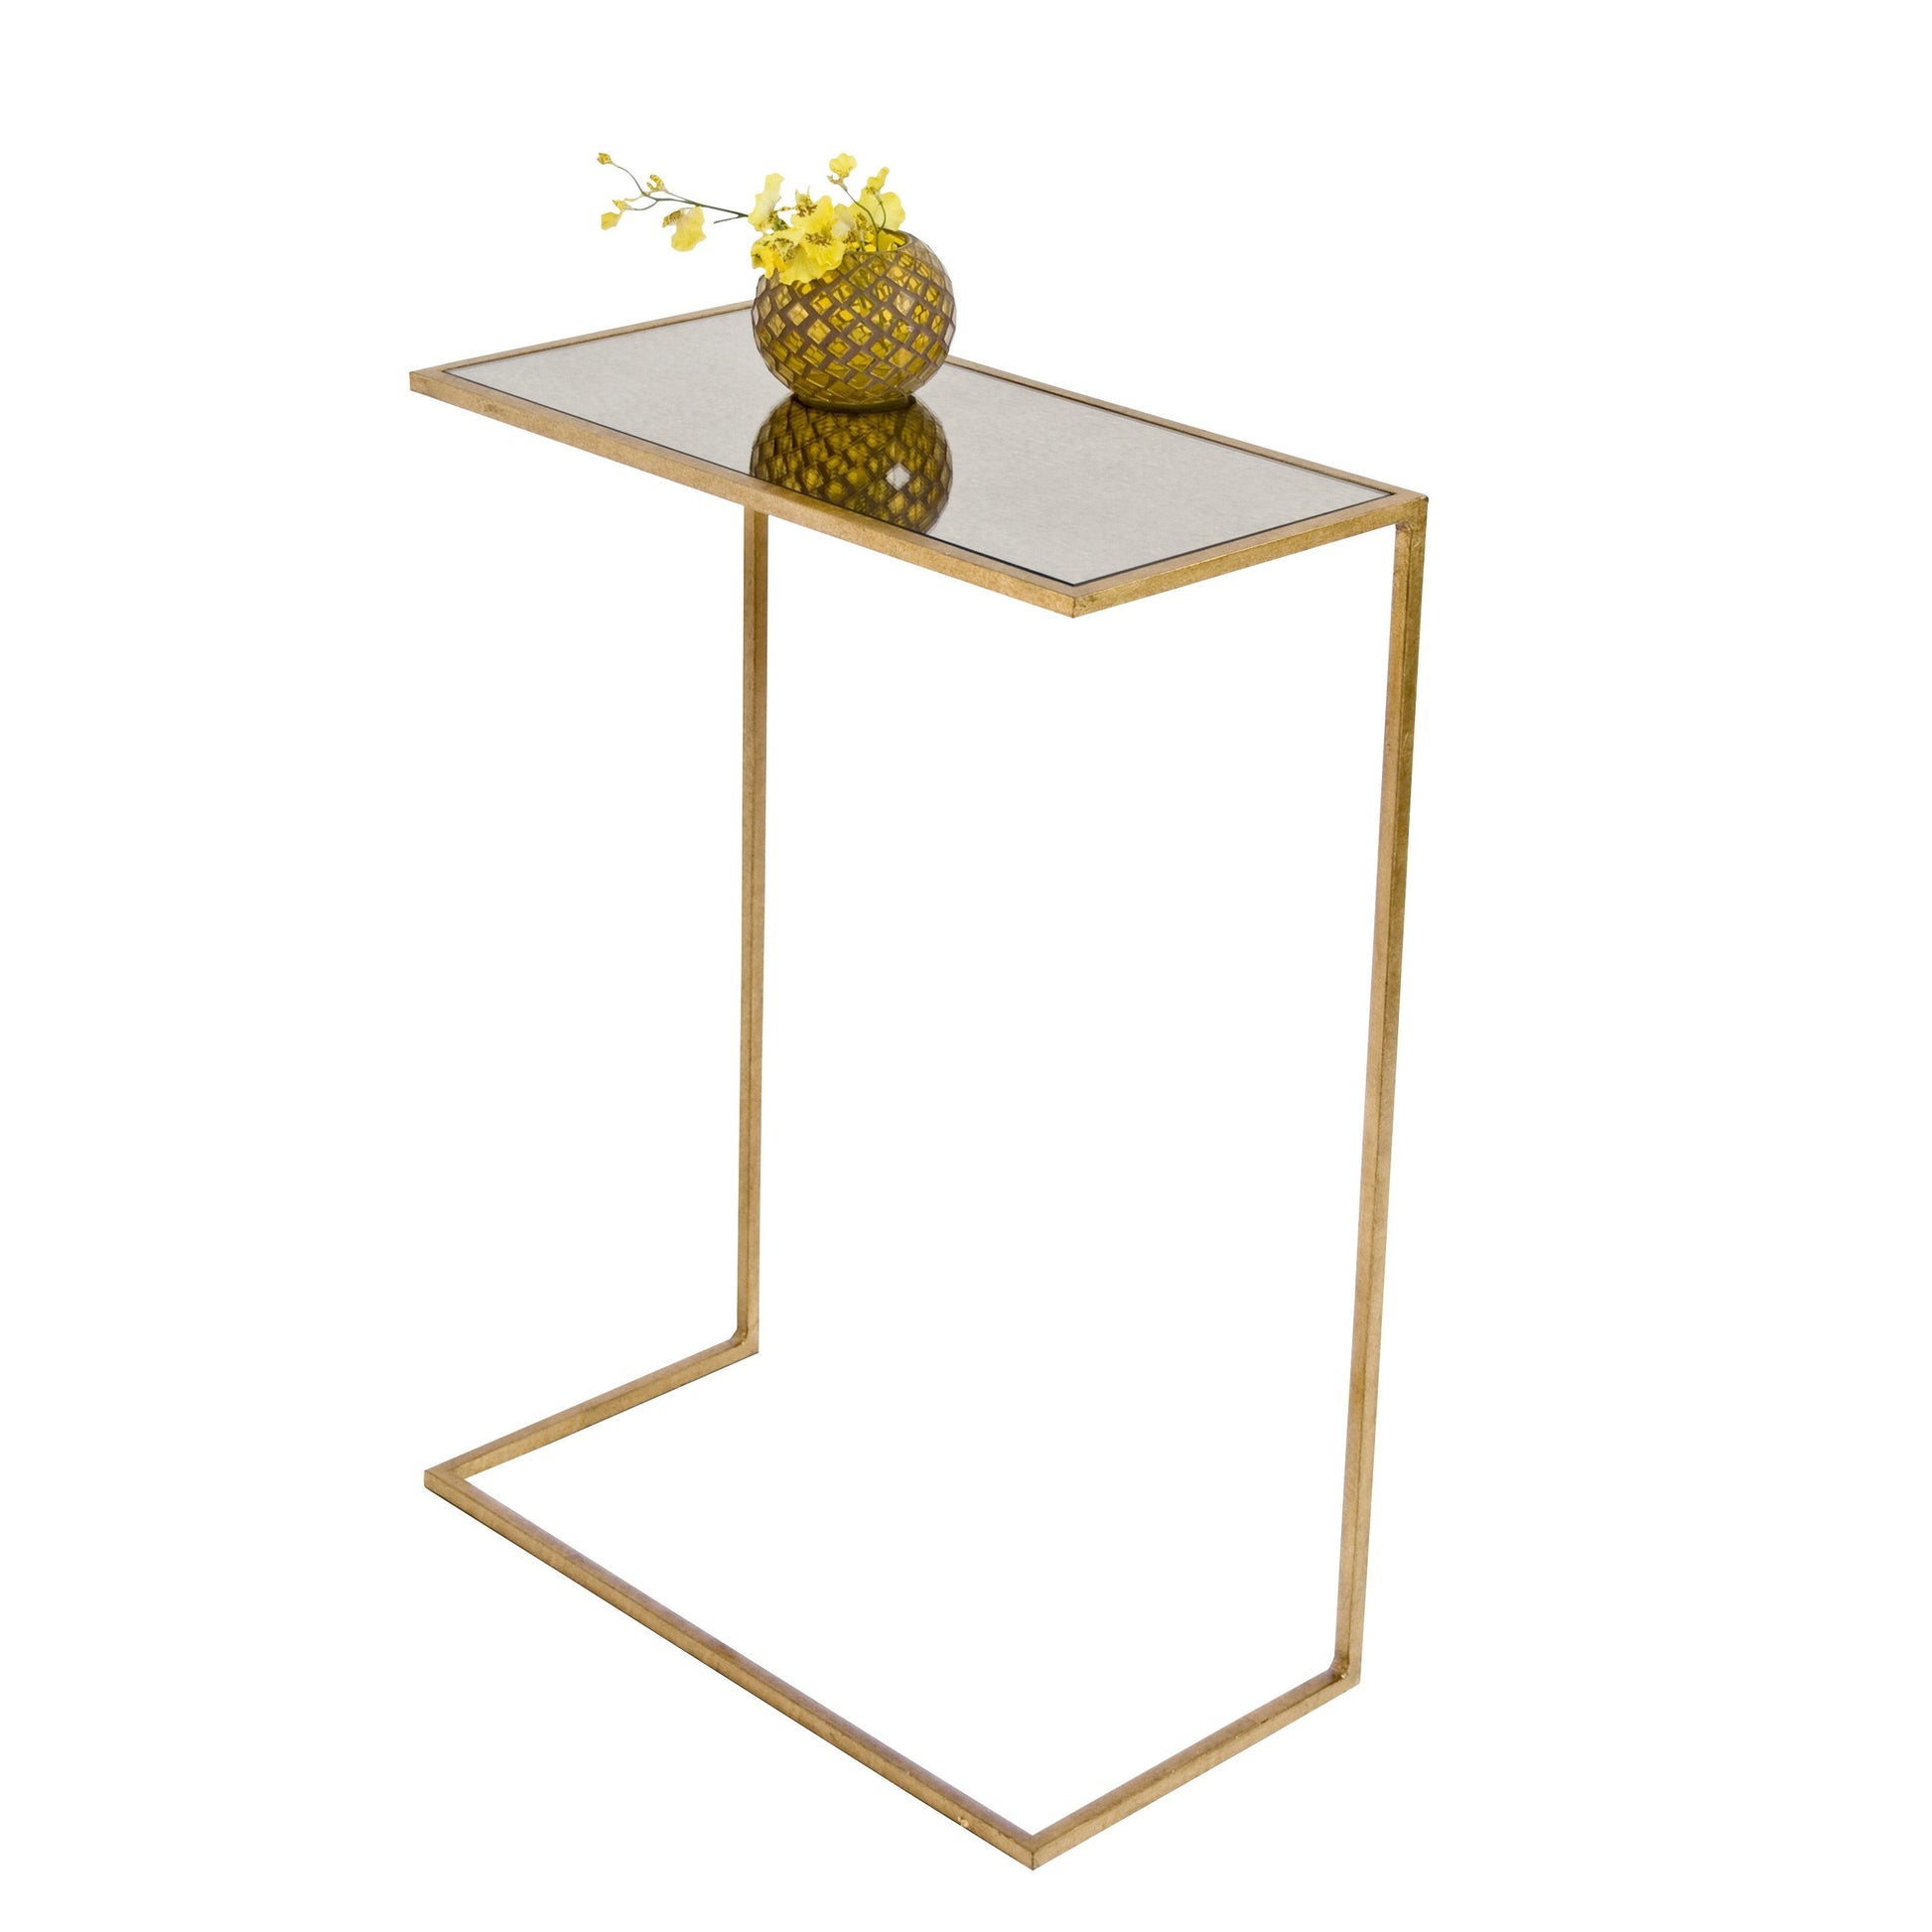 worlds away RICO antique mirror cigar side table gold leaf